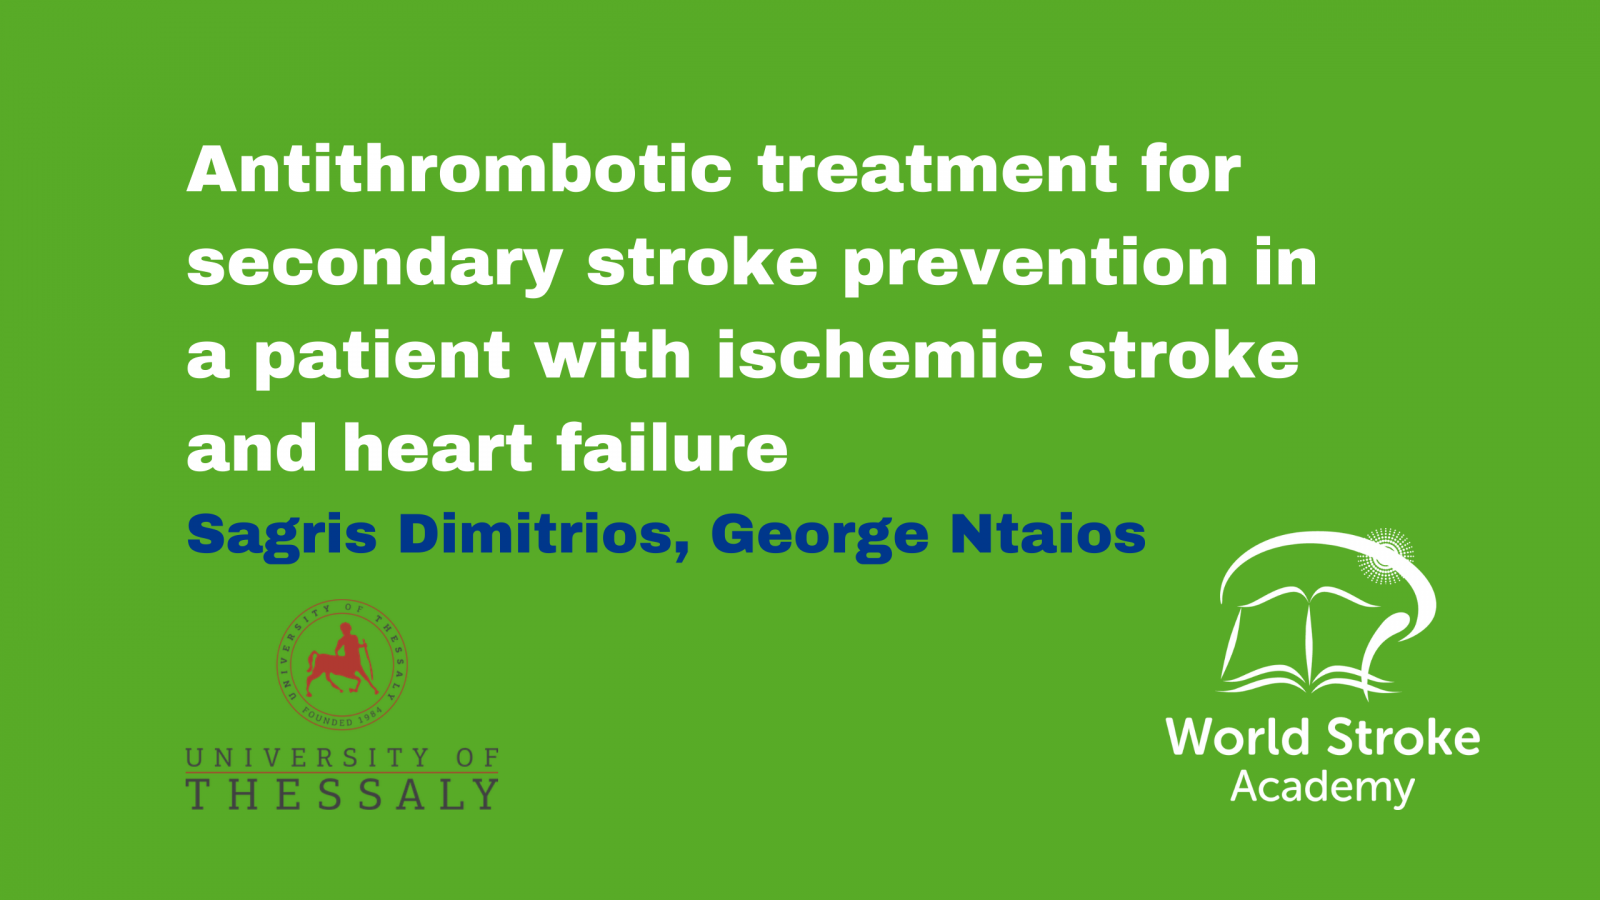 Antithrombotic treatment for secondary stroke prevention in a patient with ischemic stroke and heart failure